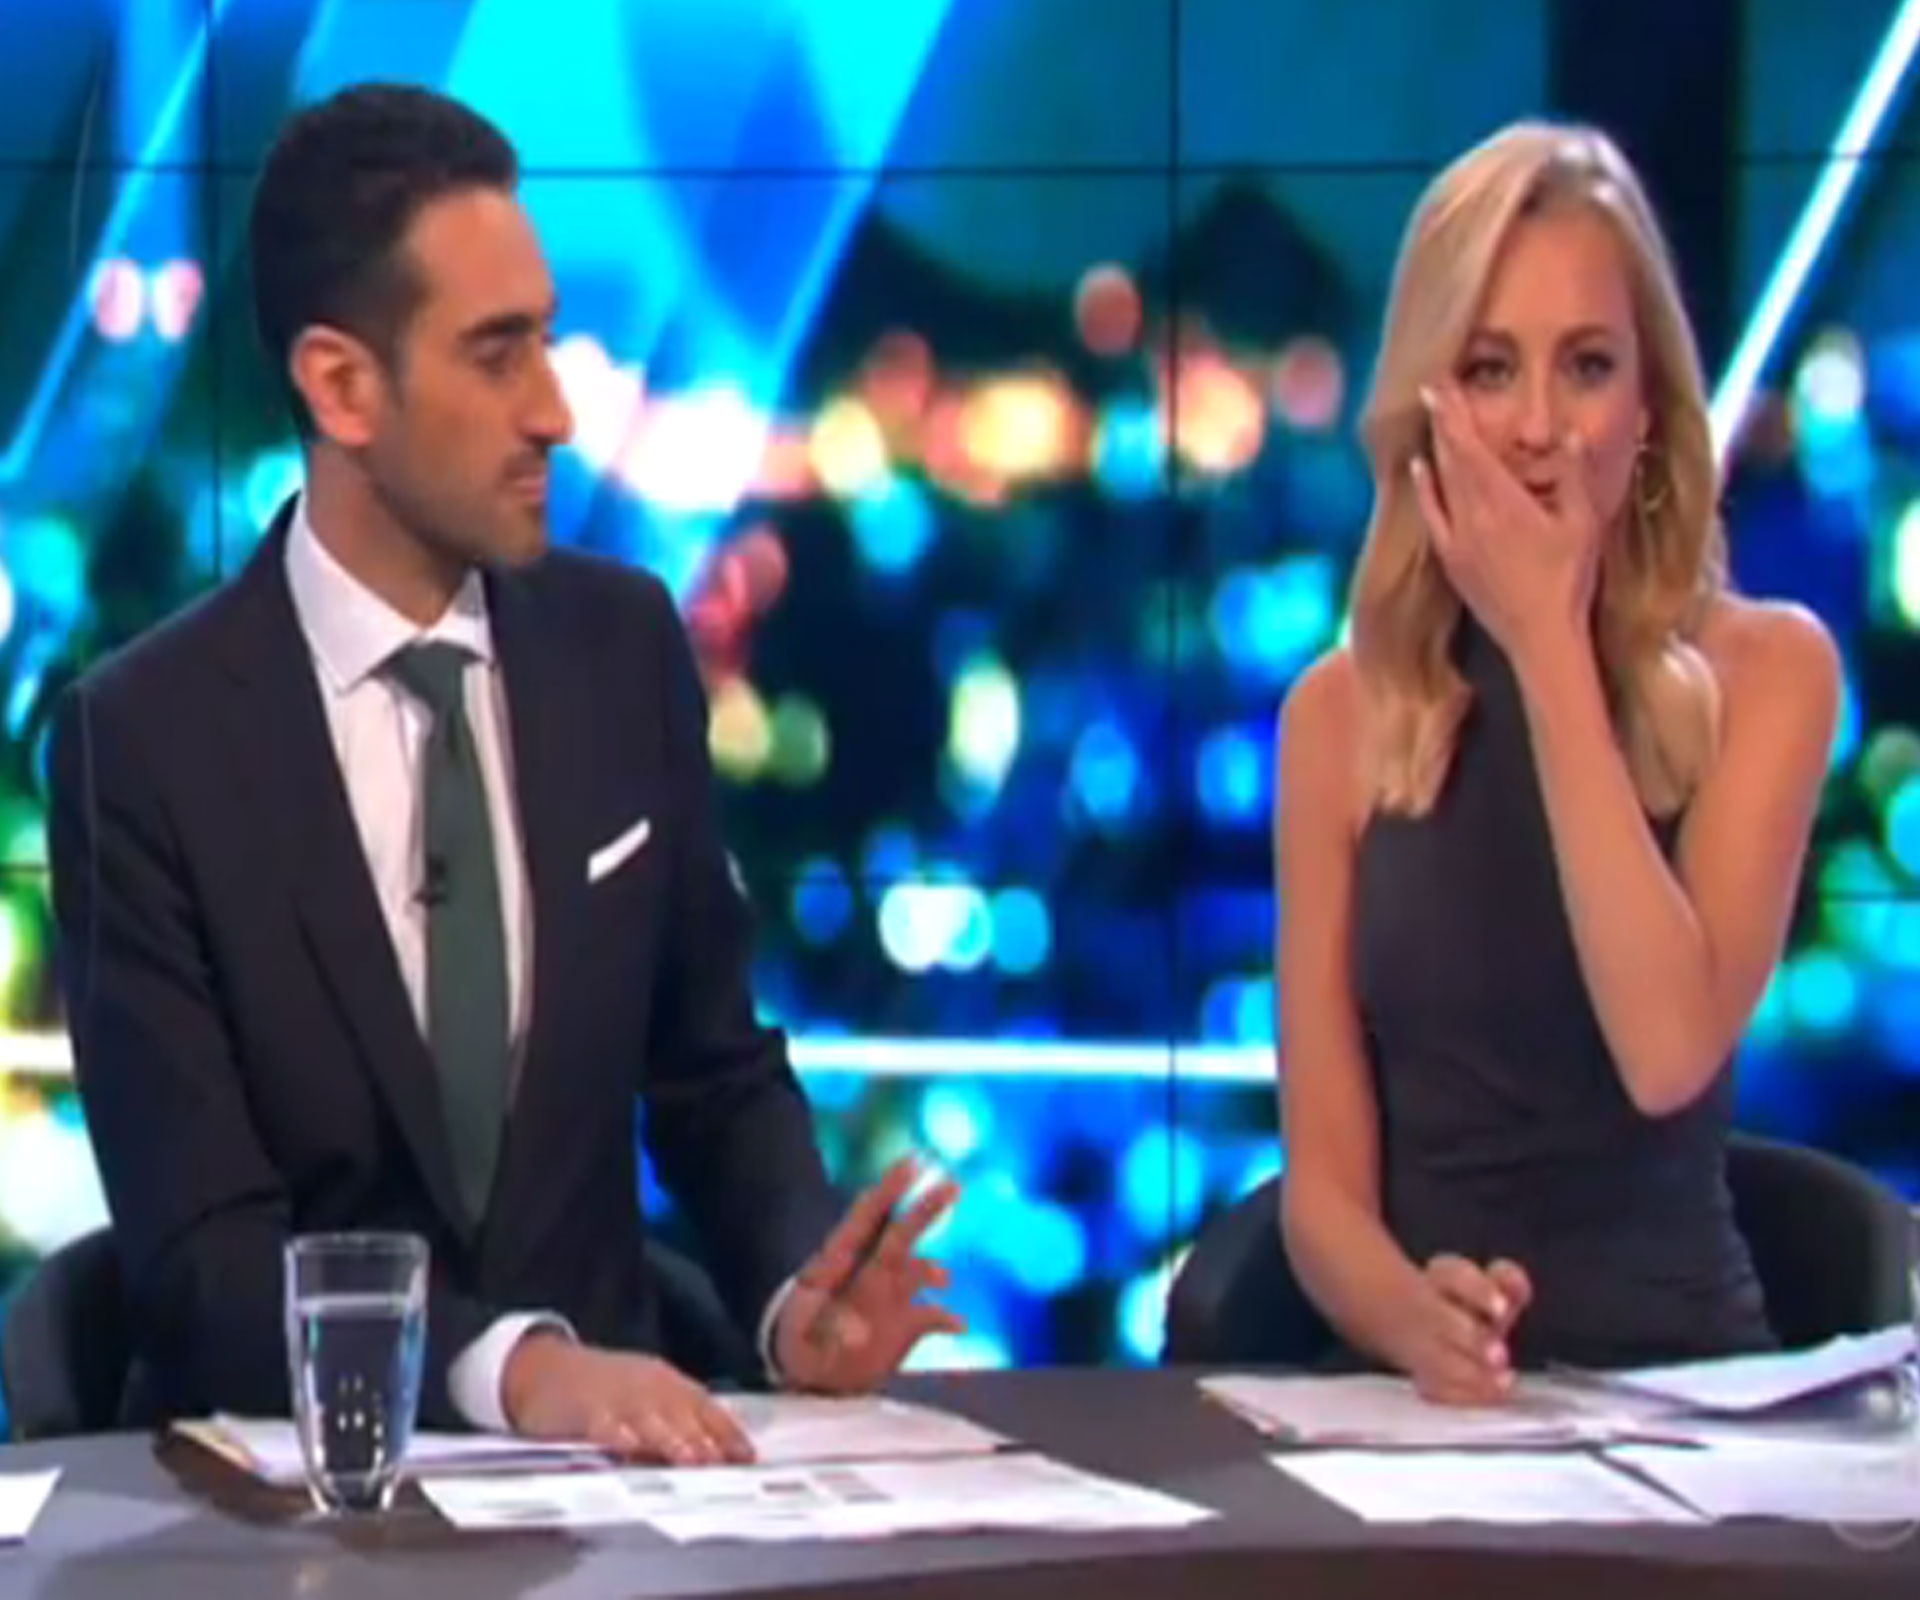 Carrie Bickmore’s emotional announcement on The Project